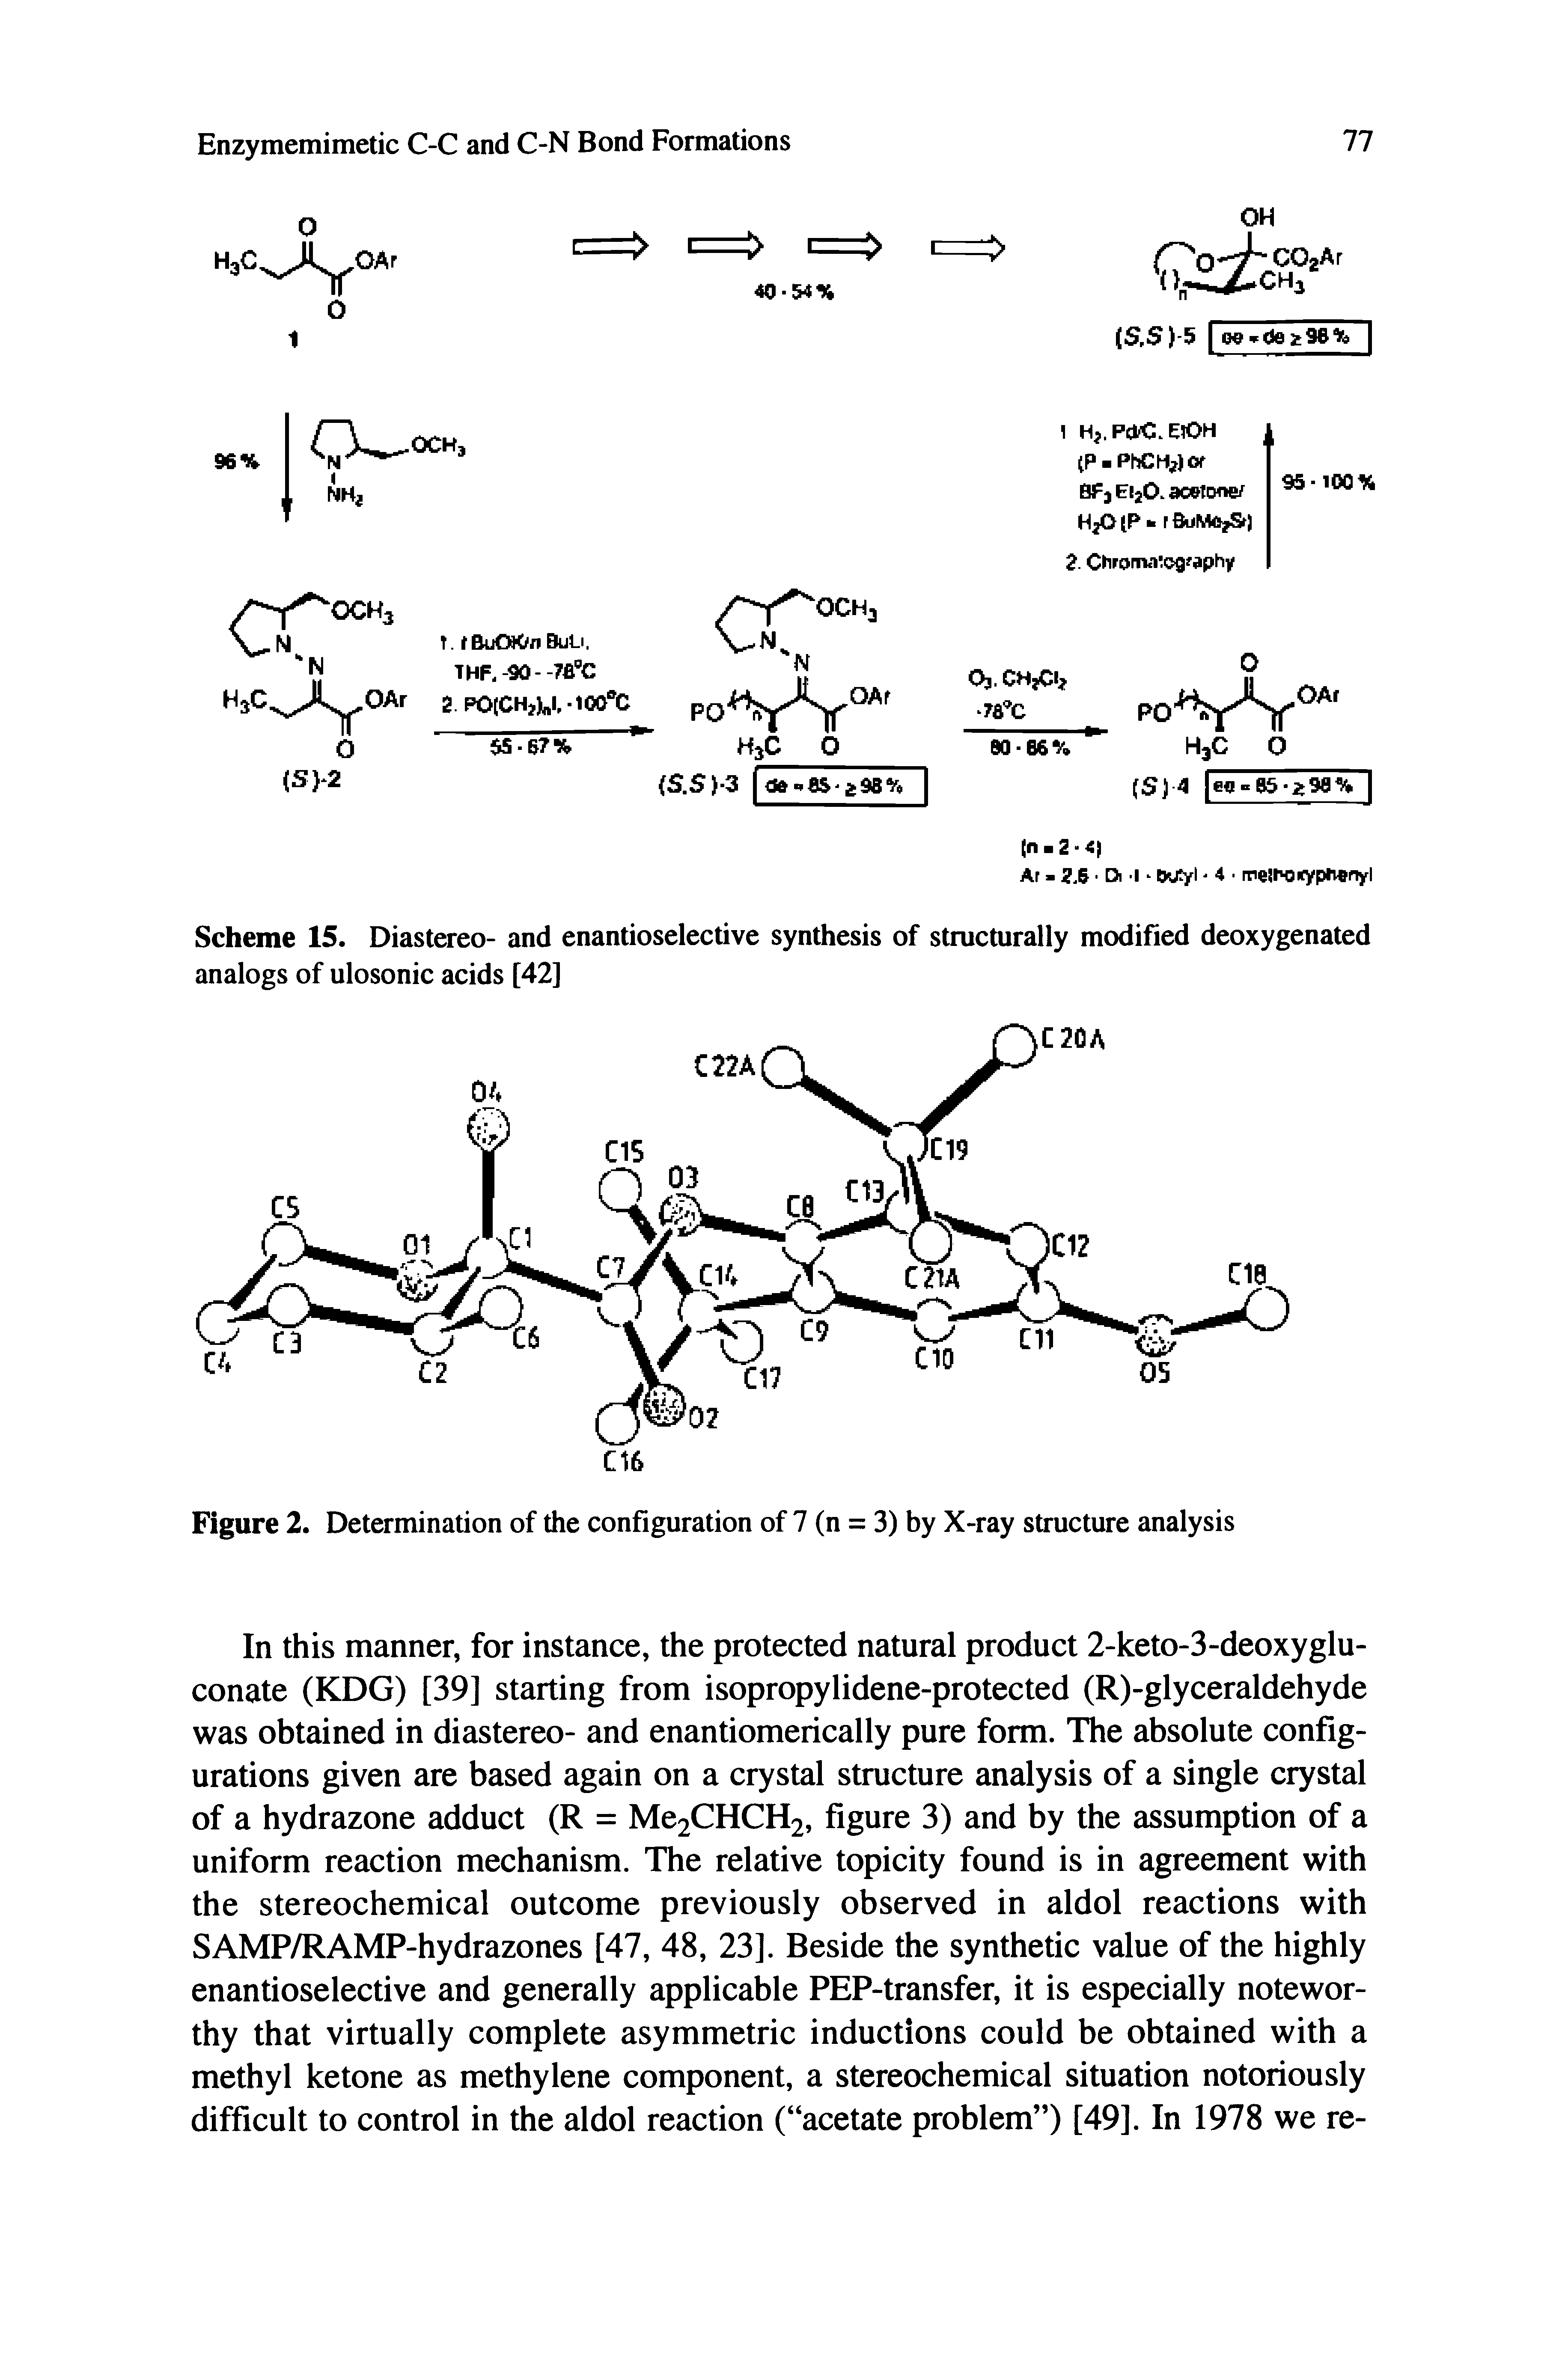 Scheme 15. Diastereo- and enantioselective synthesis of structurally modified deoxygenated analogs of ulosonic acids [42]...